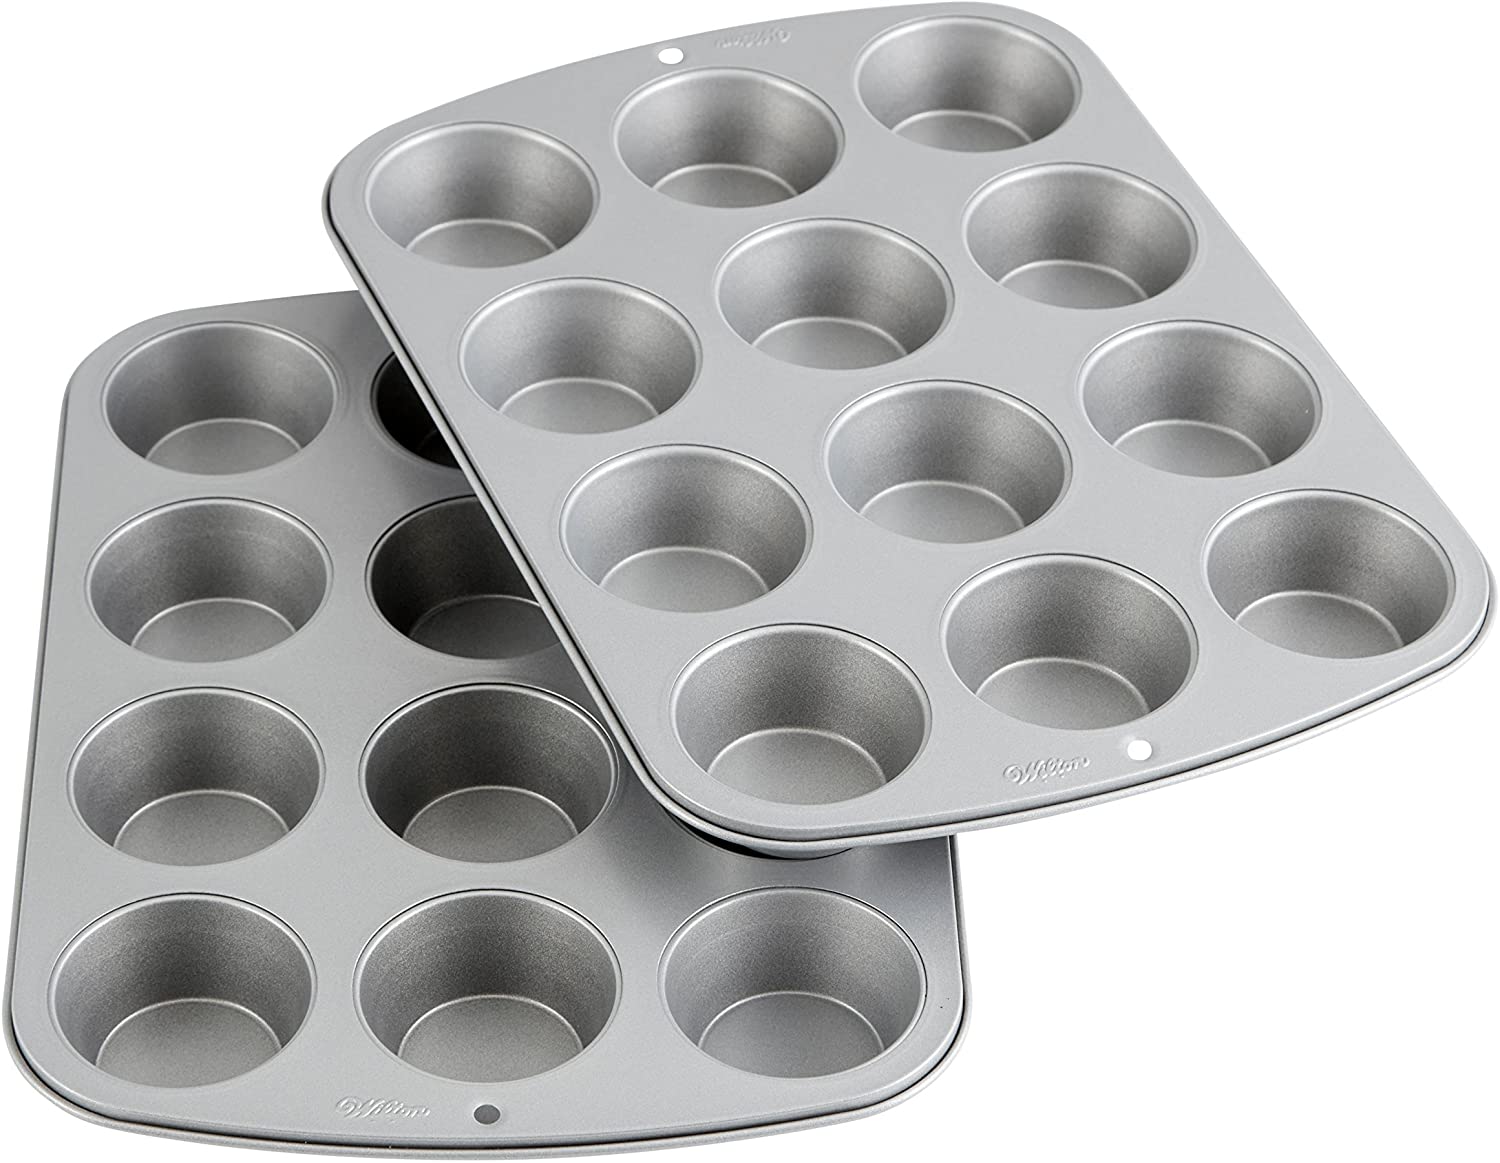 Wilton 2109-6829 12 Cup Recipe Right Muffin Mould, Pack of 2, Assorted